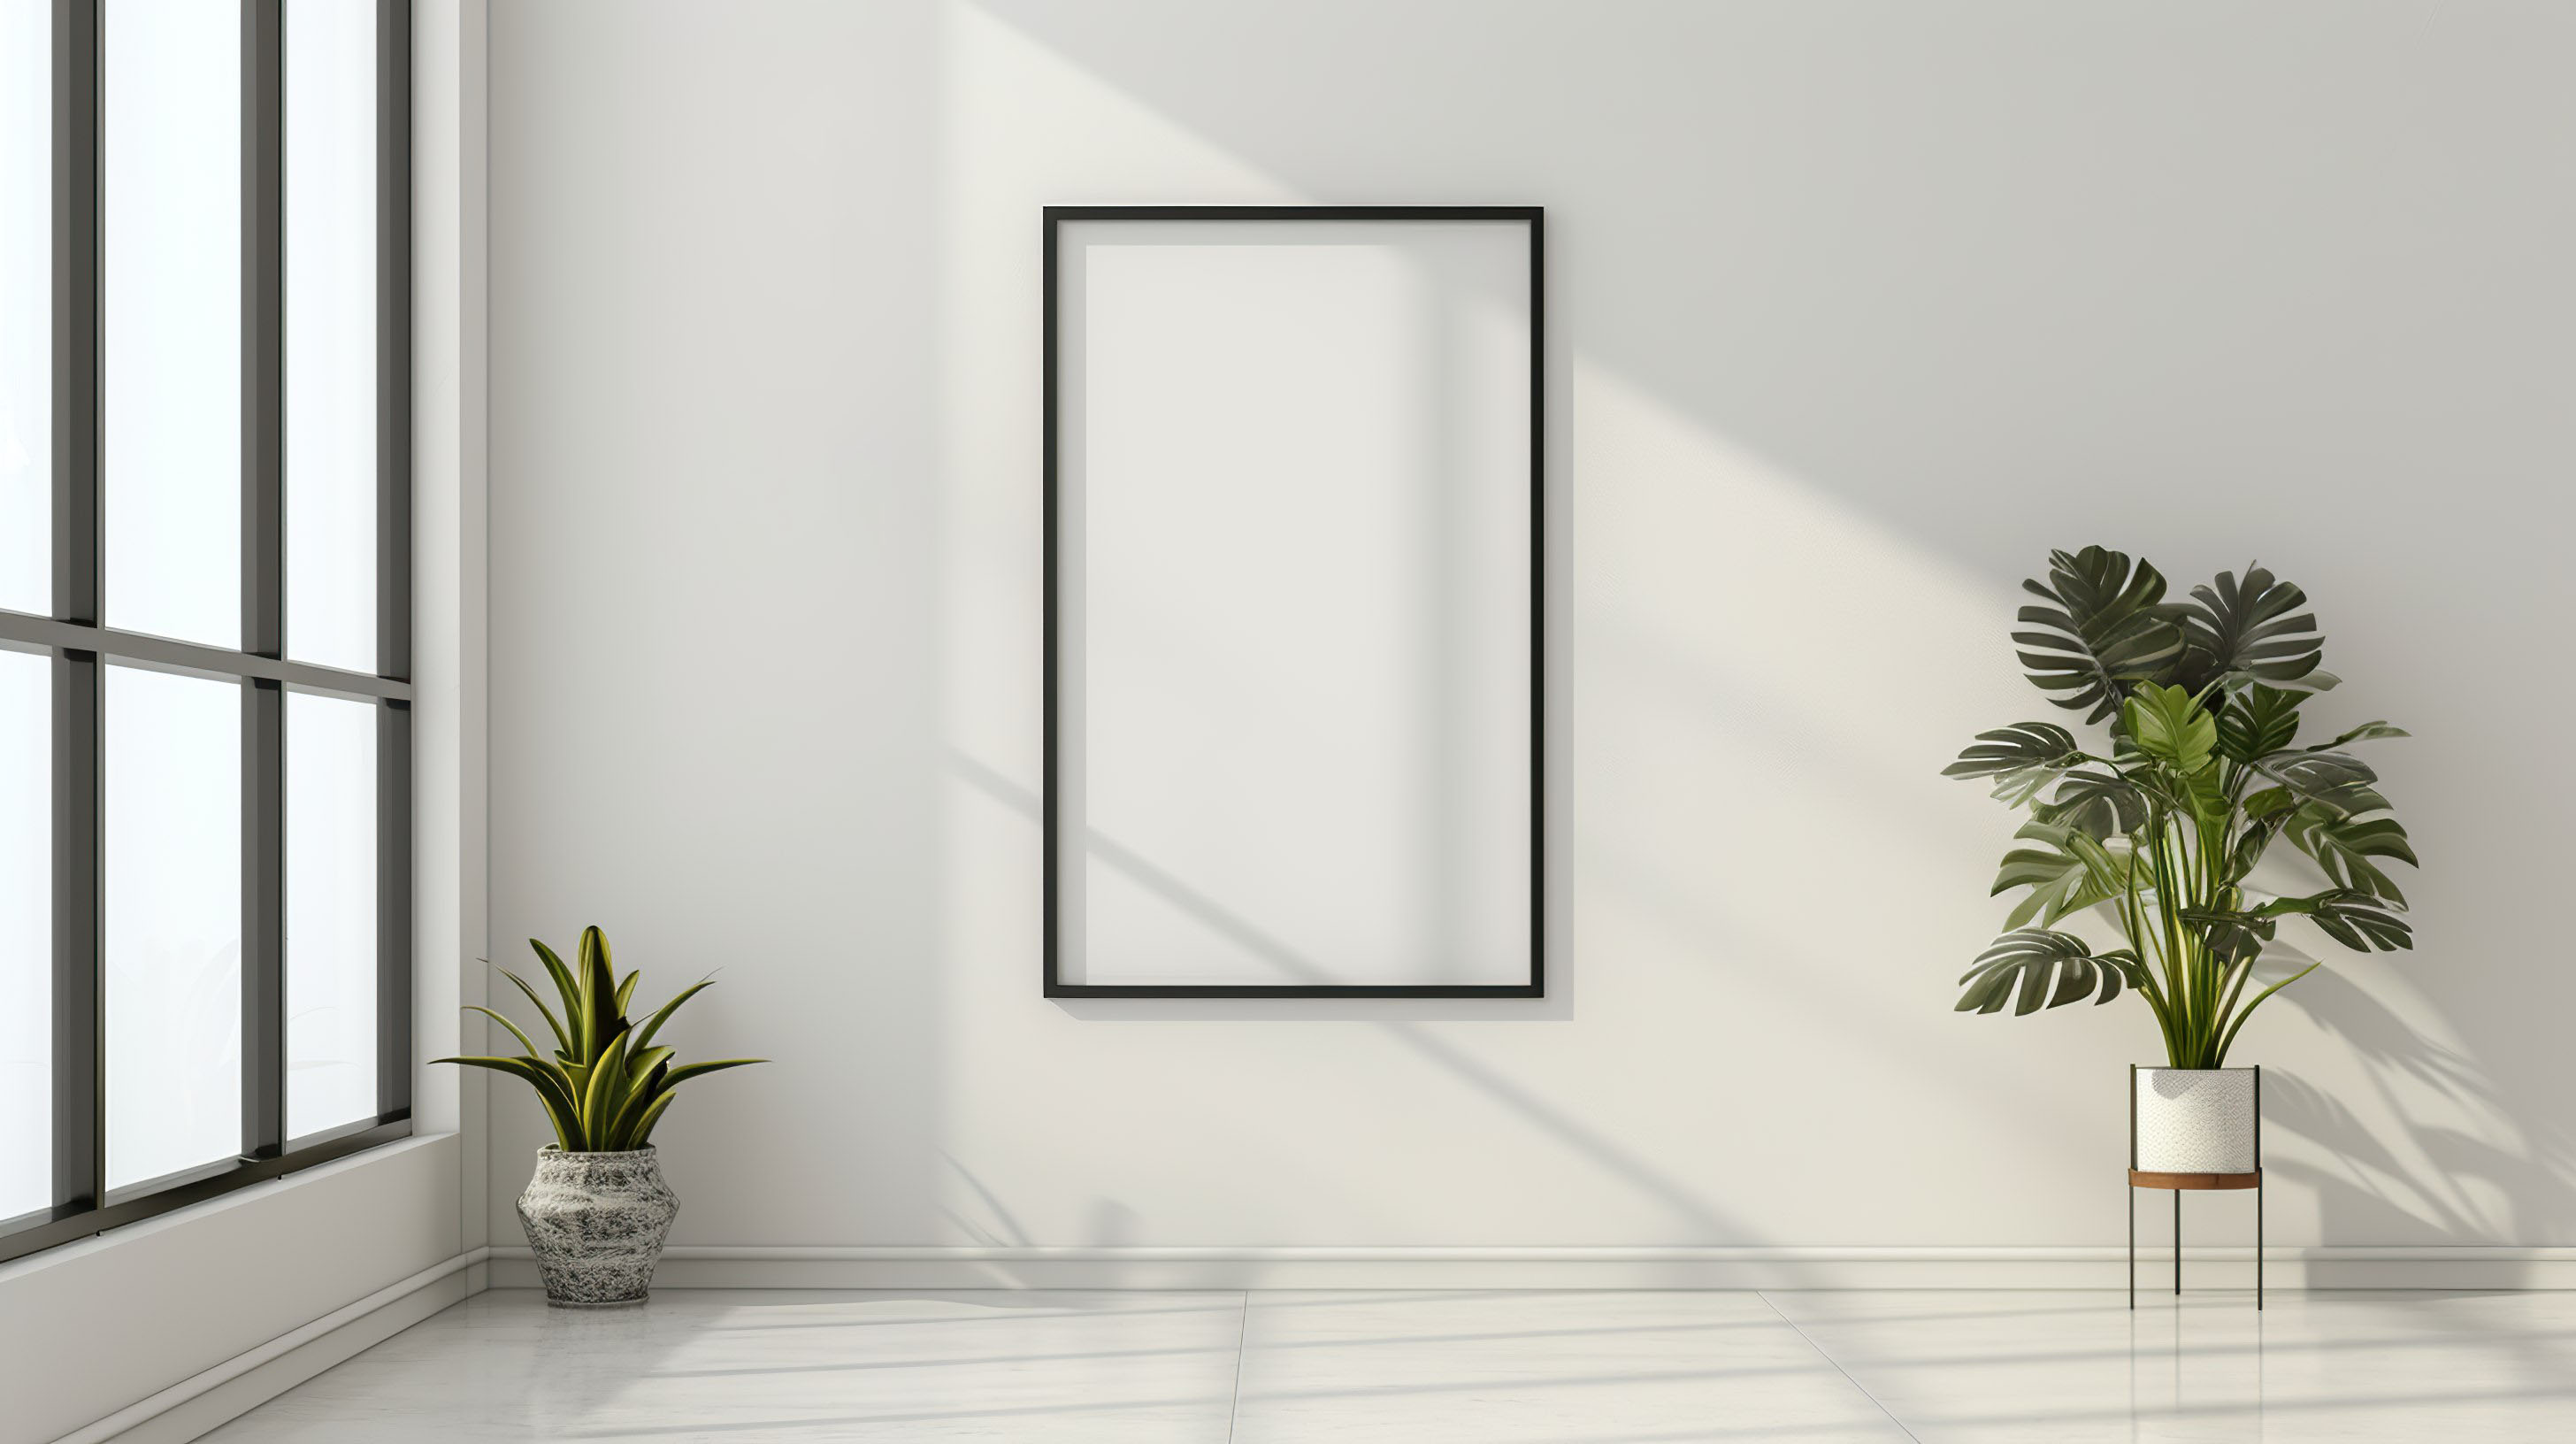 Blank frame for mockup, frame hanging on a wall